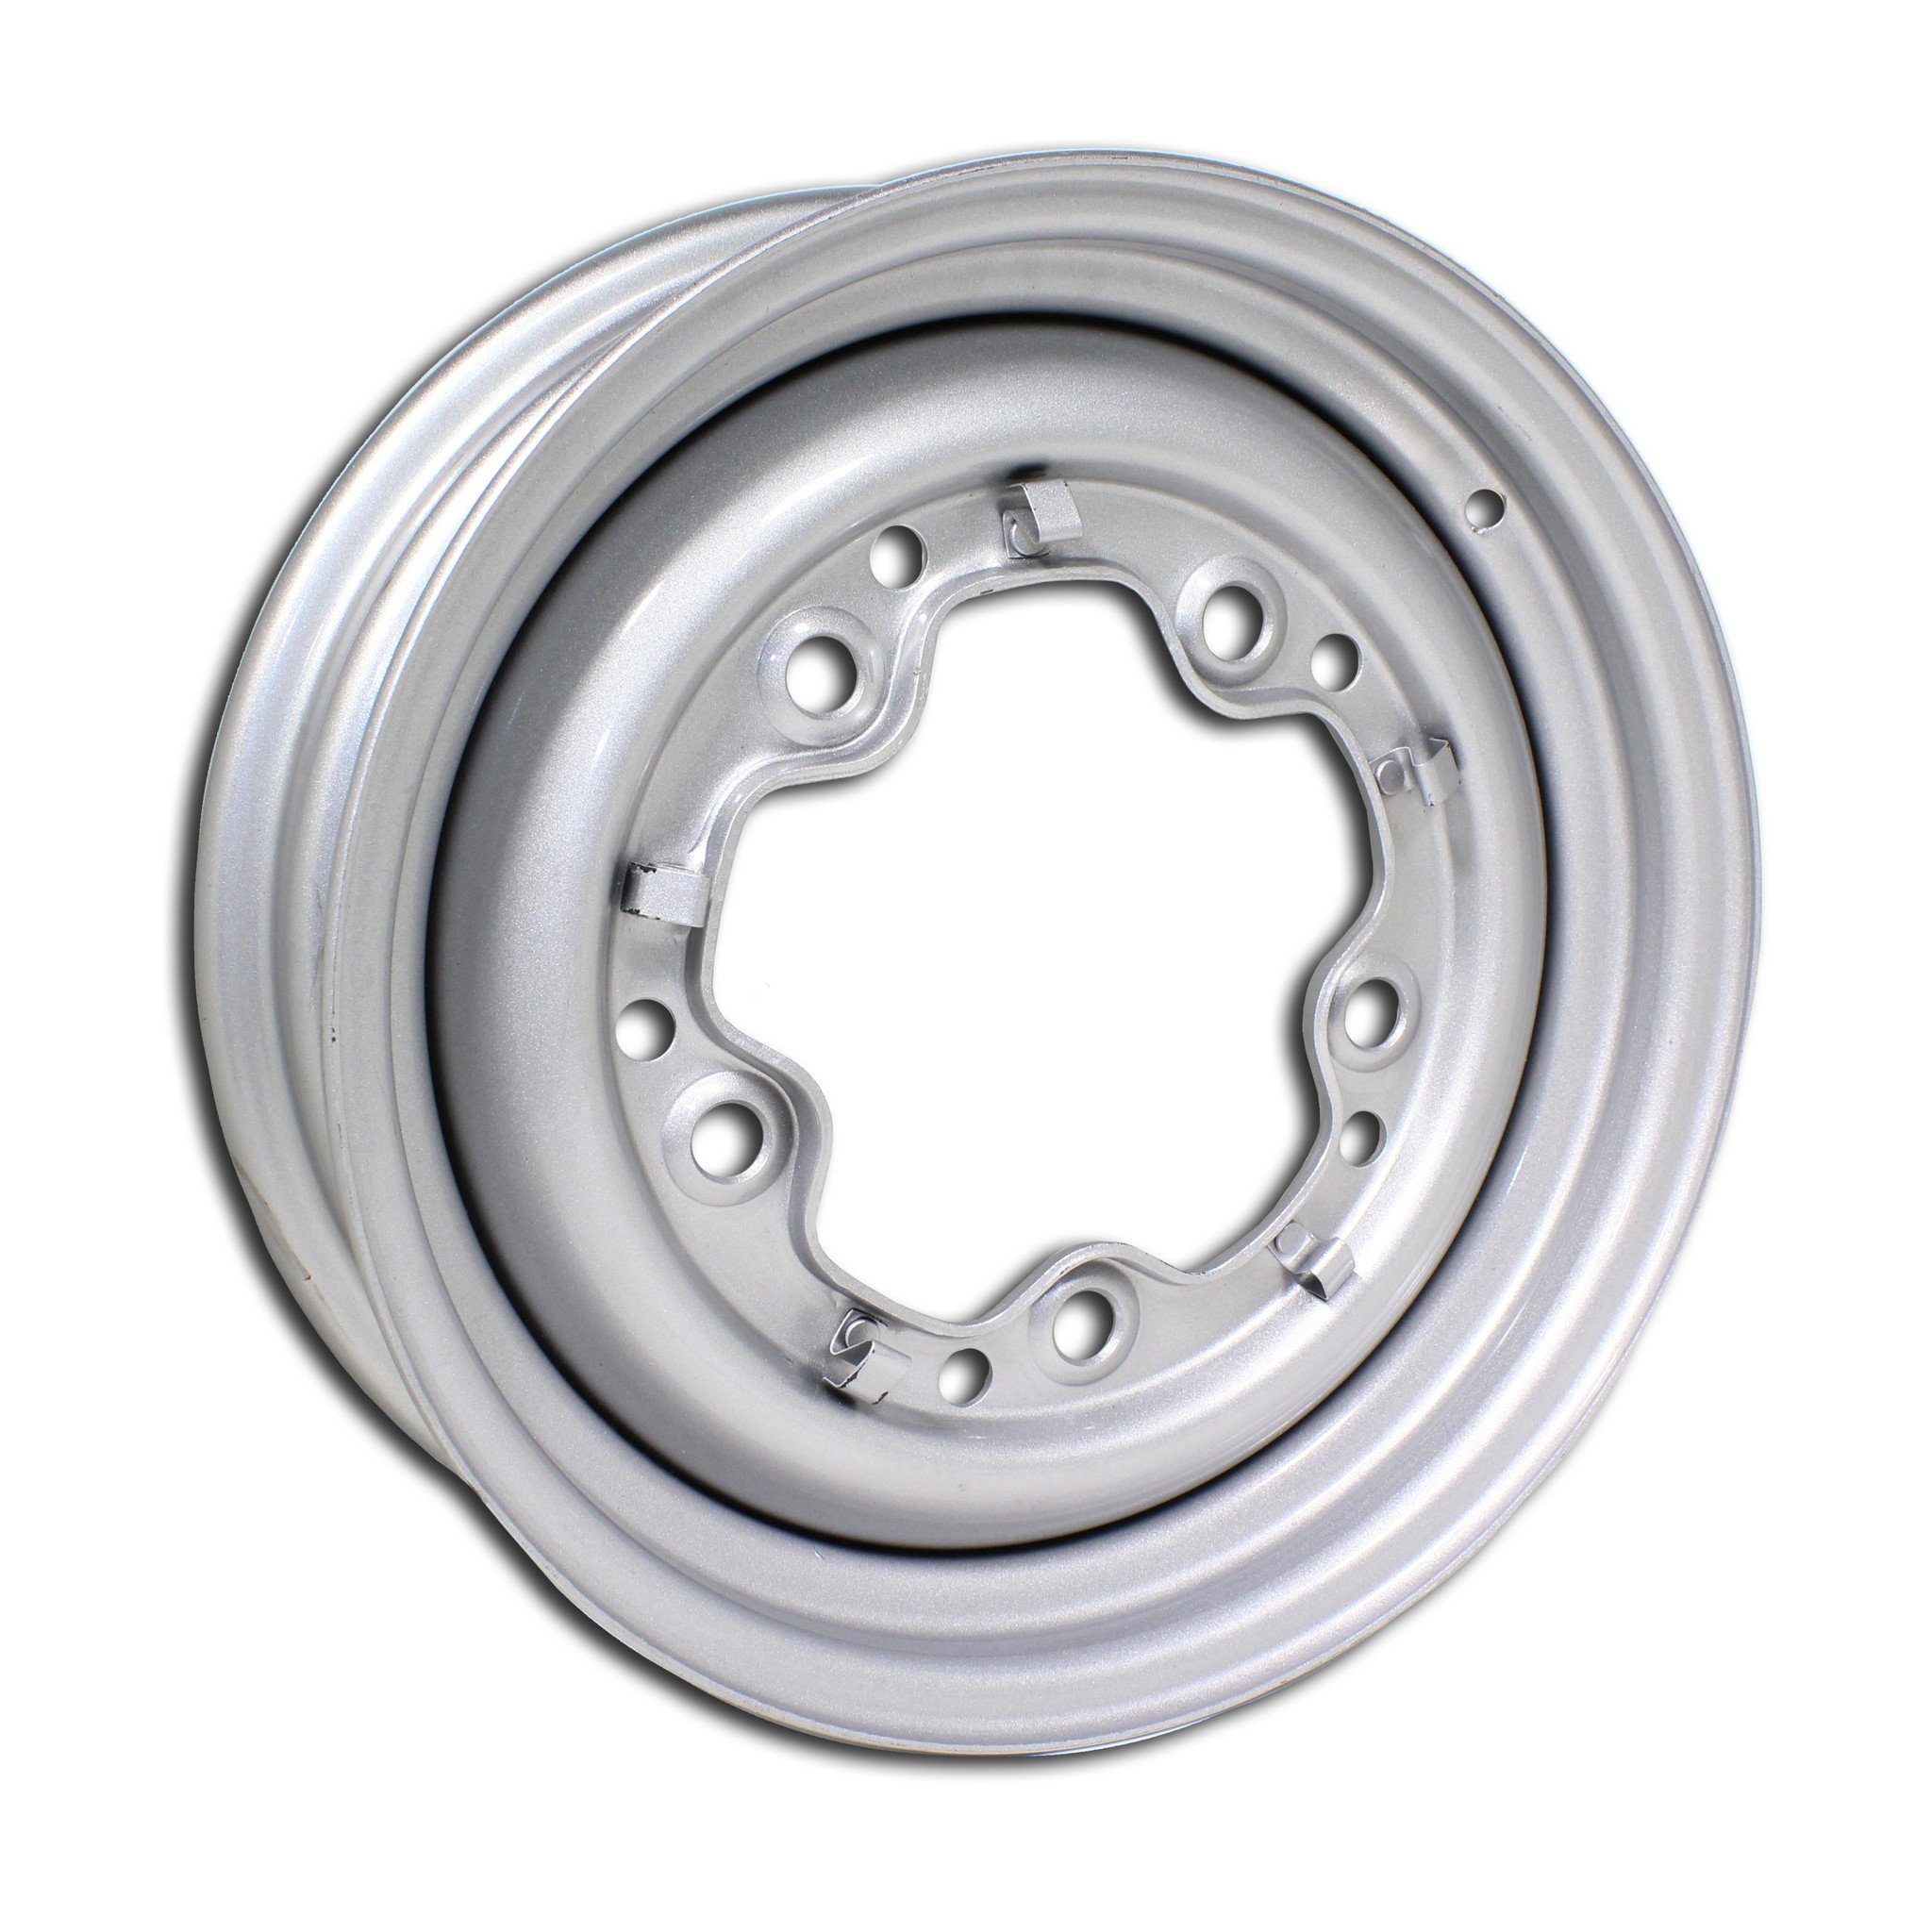 WHEEL STEEL TY1 & 3 5x205 15x4.5 SMOOTHIE SILVER Part Number : 601140SP...